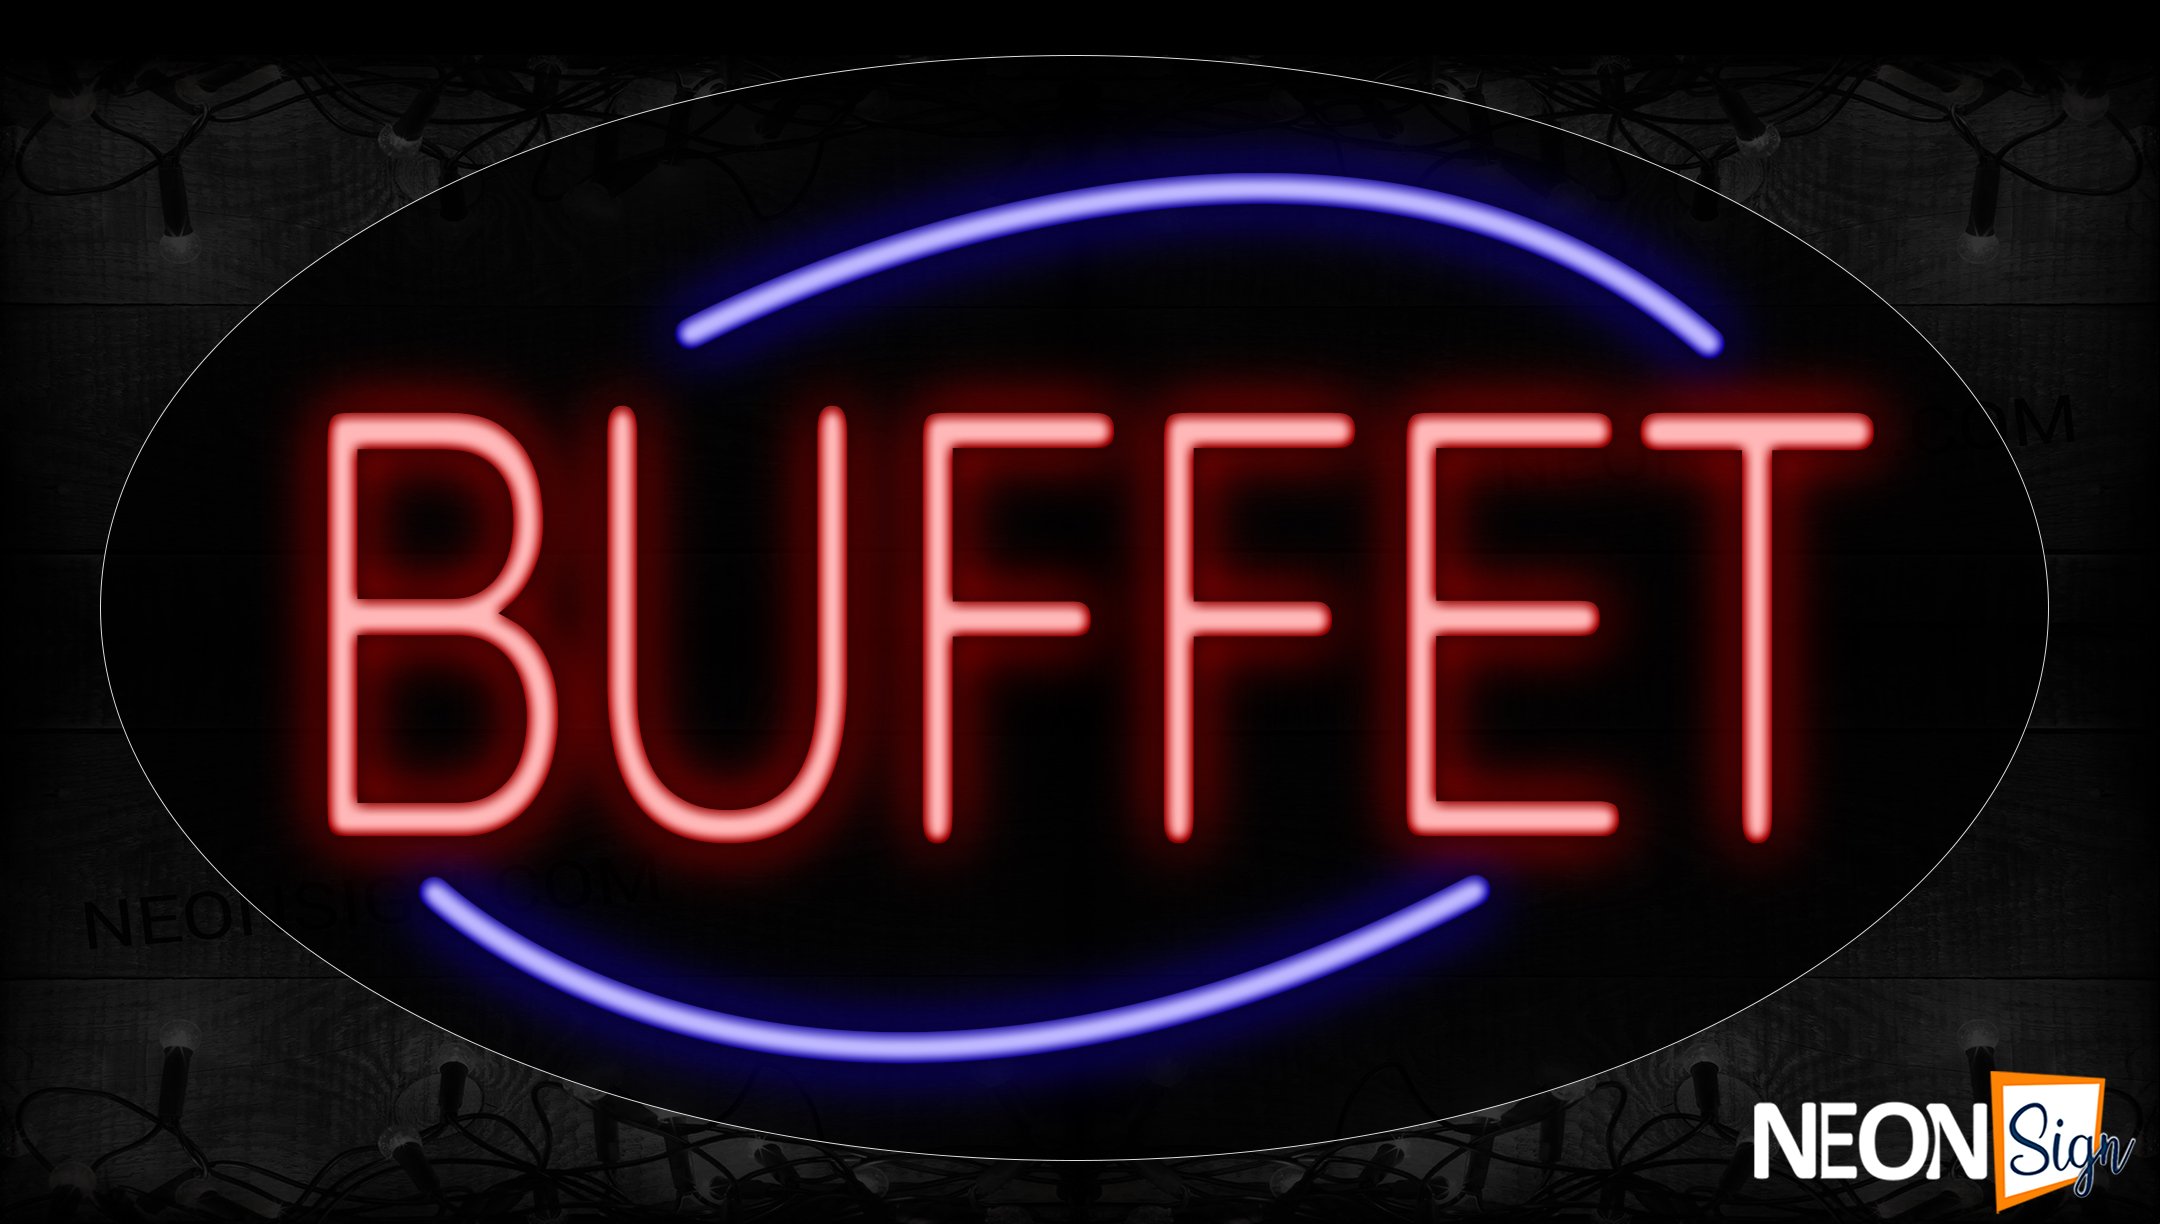 Image of 14163 Buffet With Arc Border Neon Signs_17x30 Contoured Black Backing